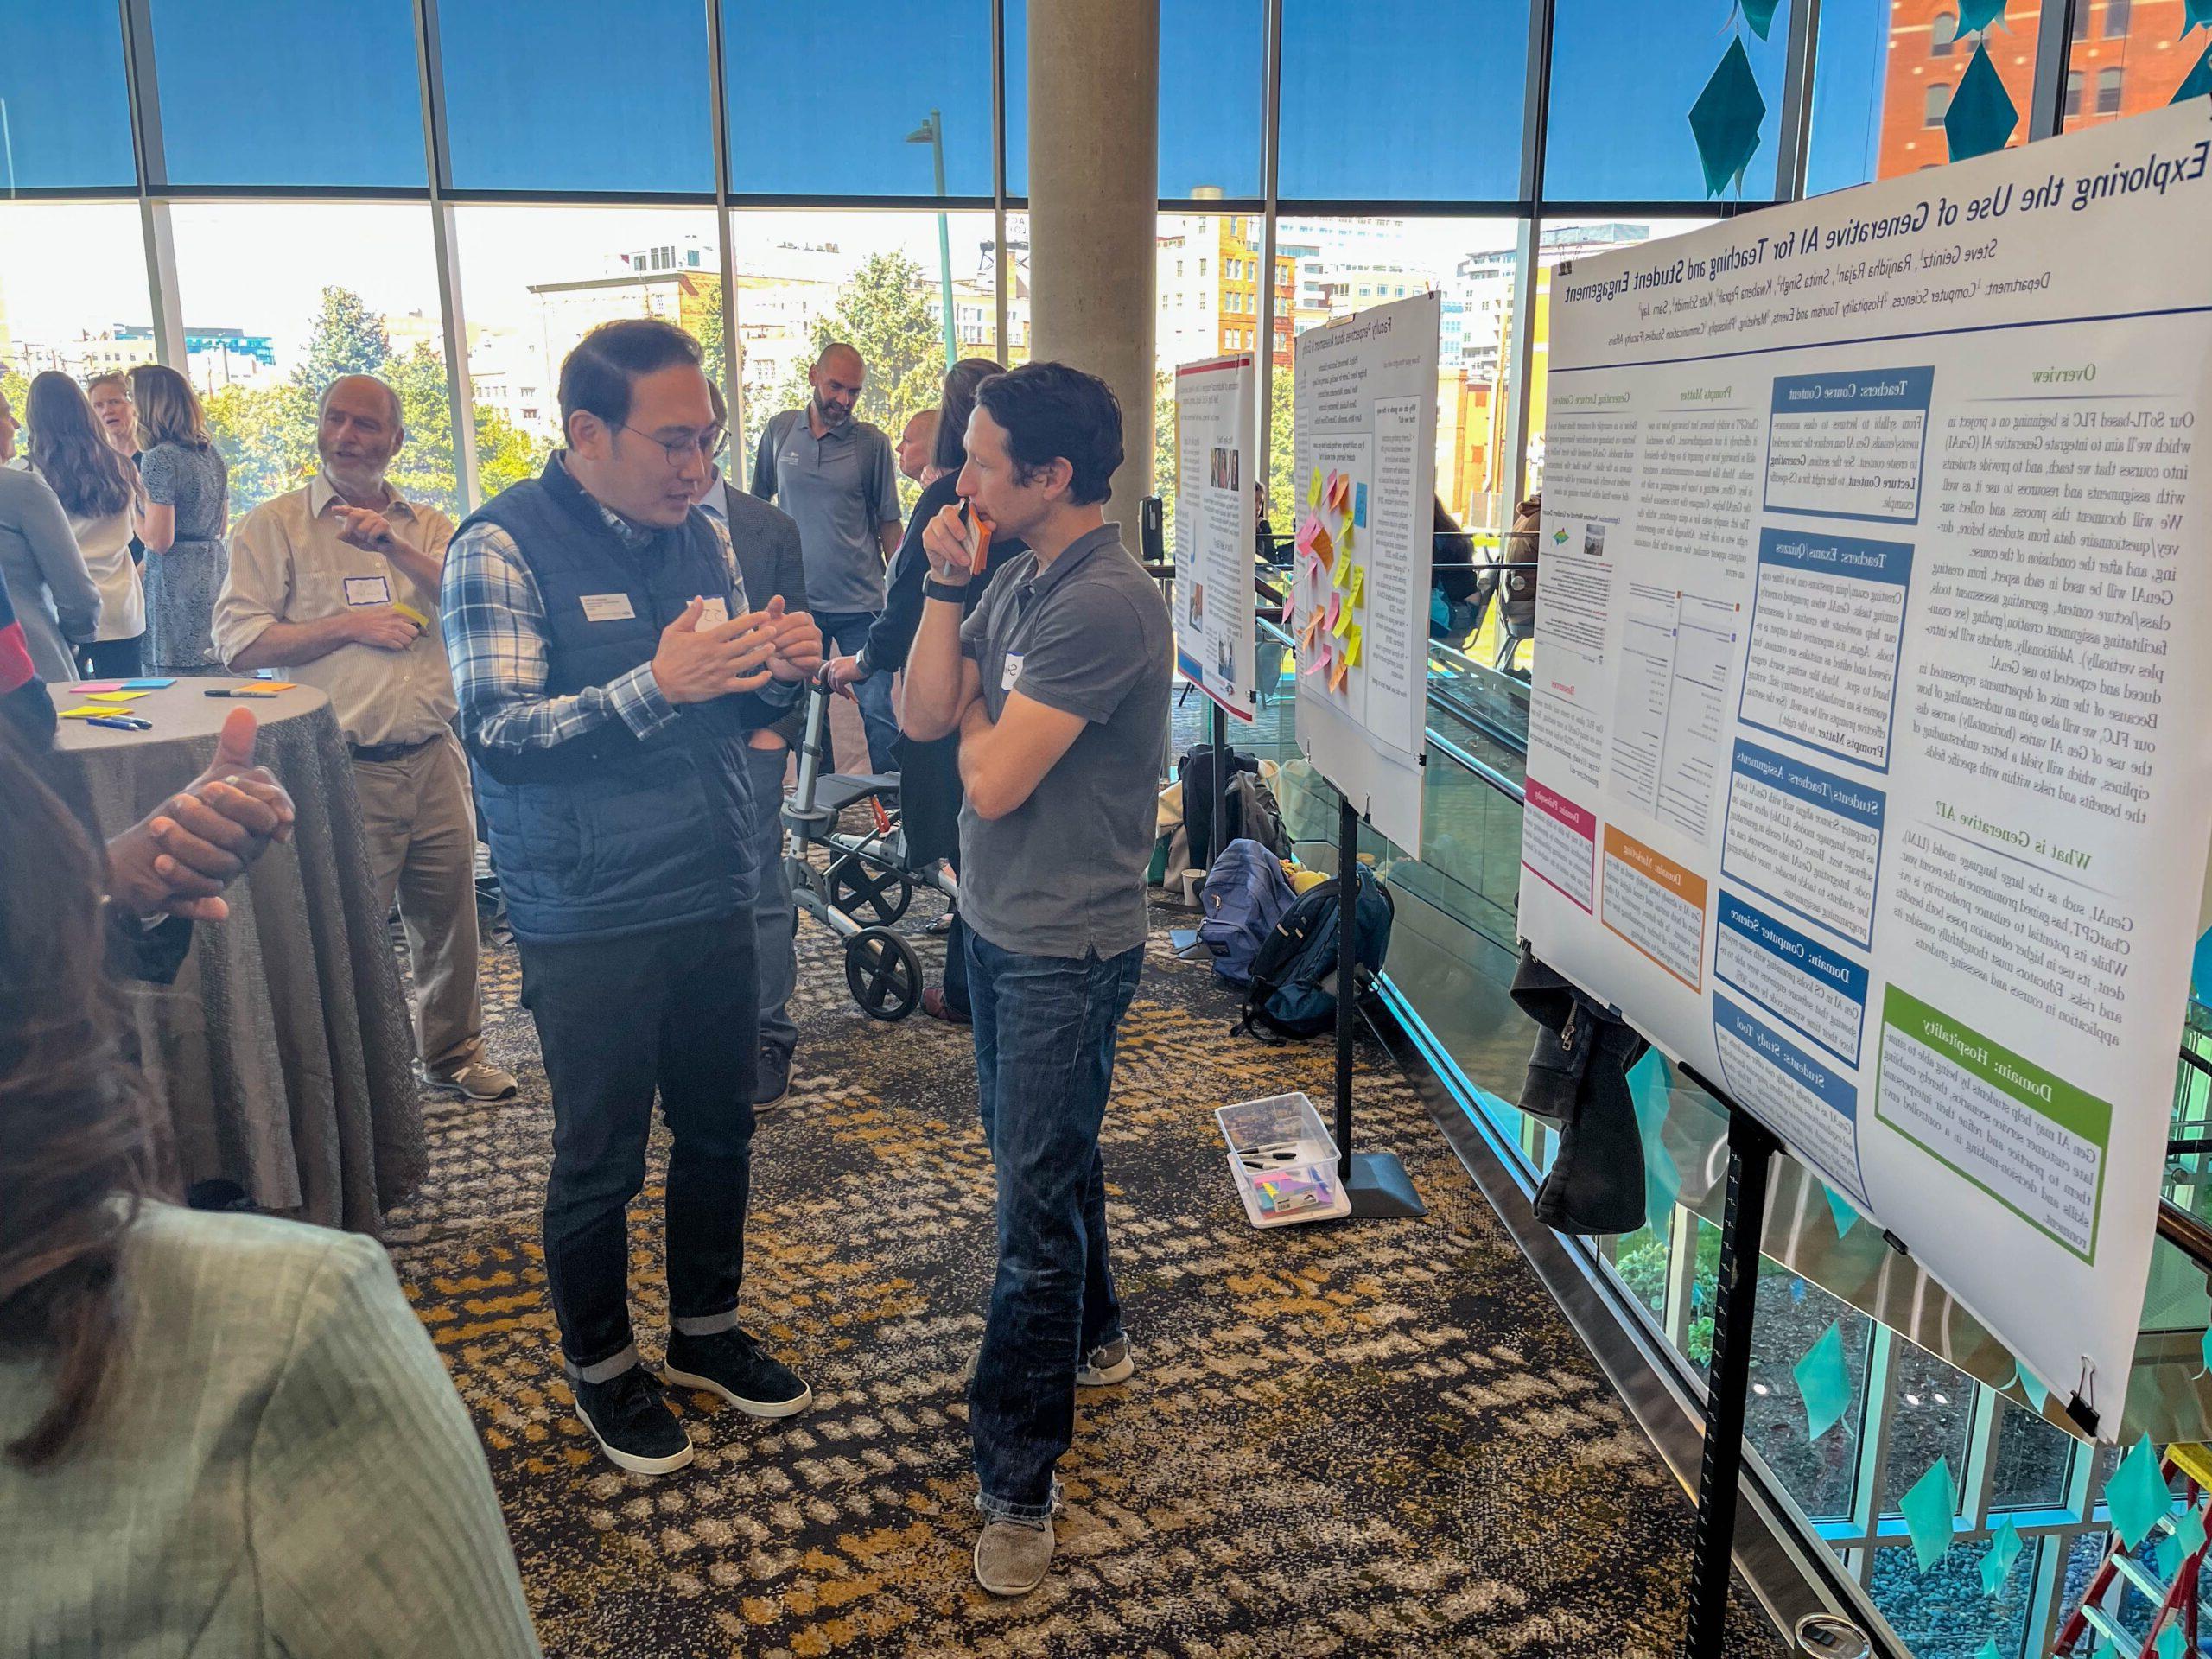 Faculty and staff discussing research projects at the SoTL poster session